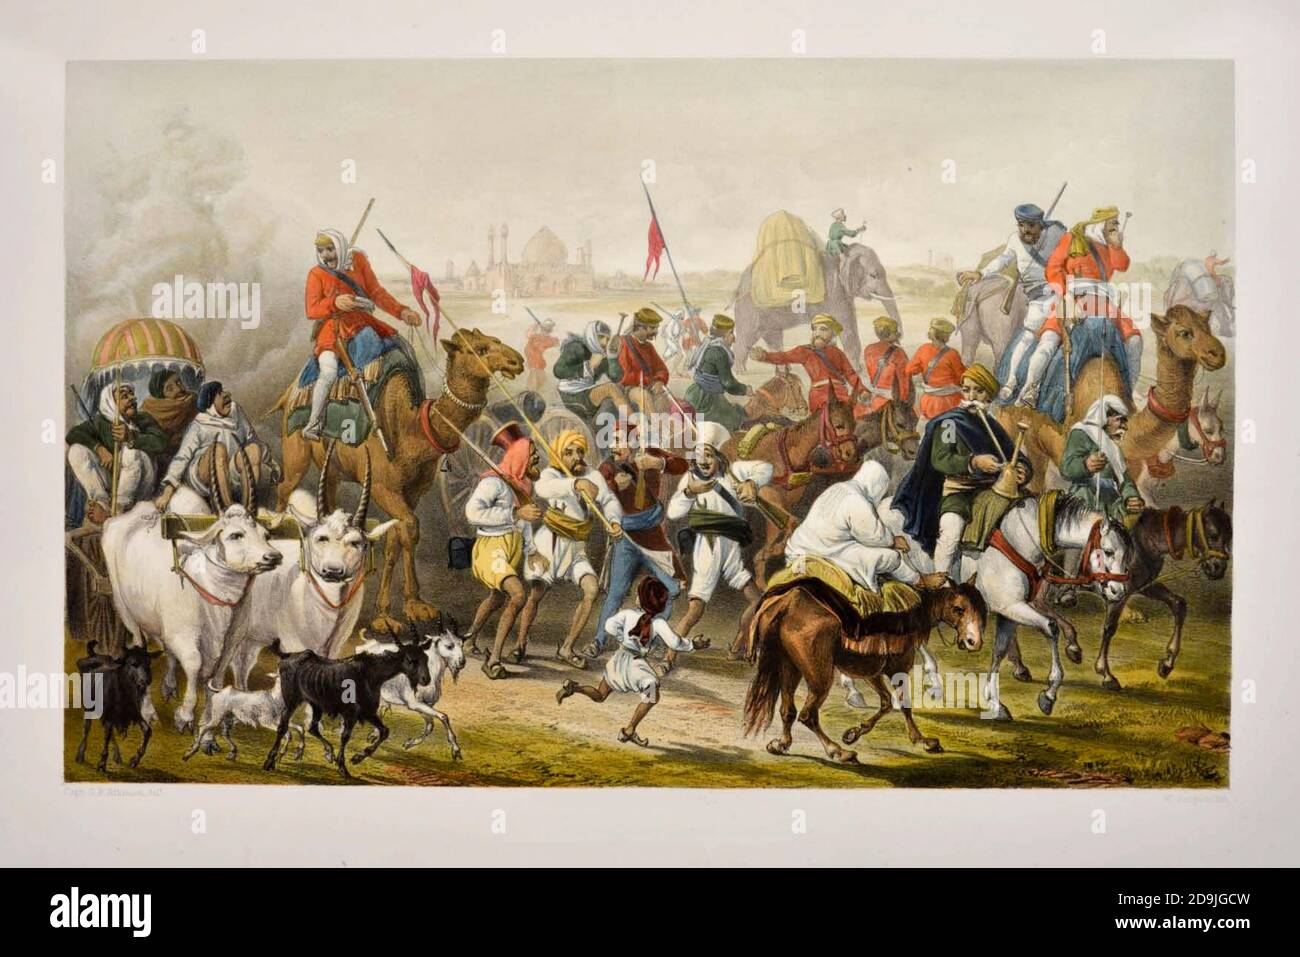 Troops of the Native Allies Lithograph from the book Campaign in India 1857-58 Illustrating the military operations before Delhi ; 26 Hand coloured Lithographed plates. by George Francklin Atkinson Published by Day & Son Lithographers to the Queen in 1859 Stock Photo